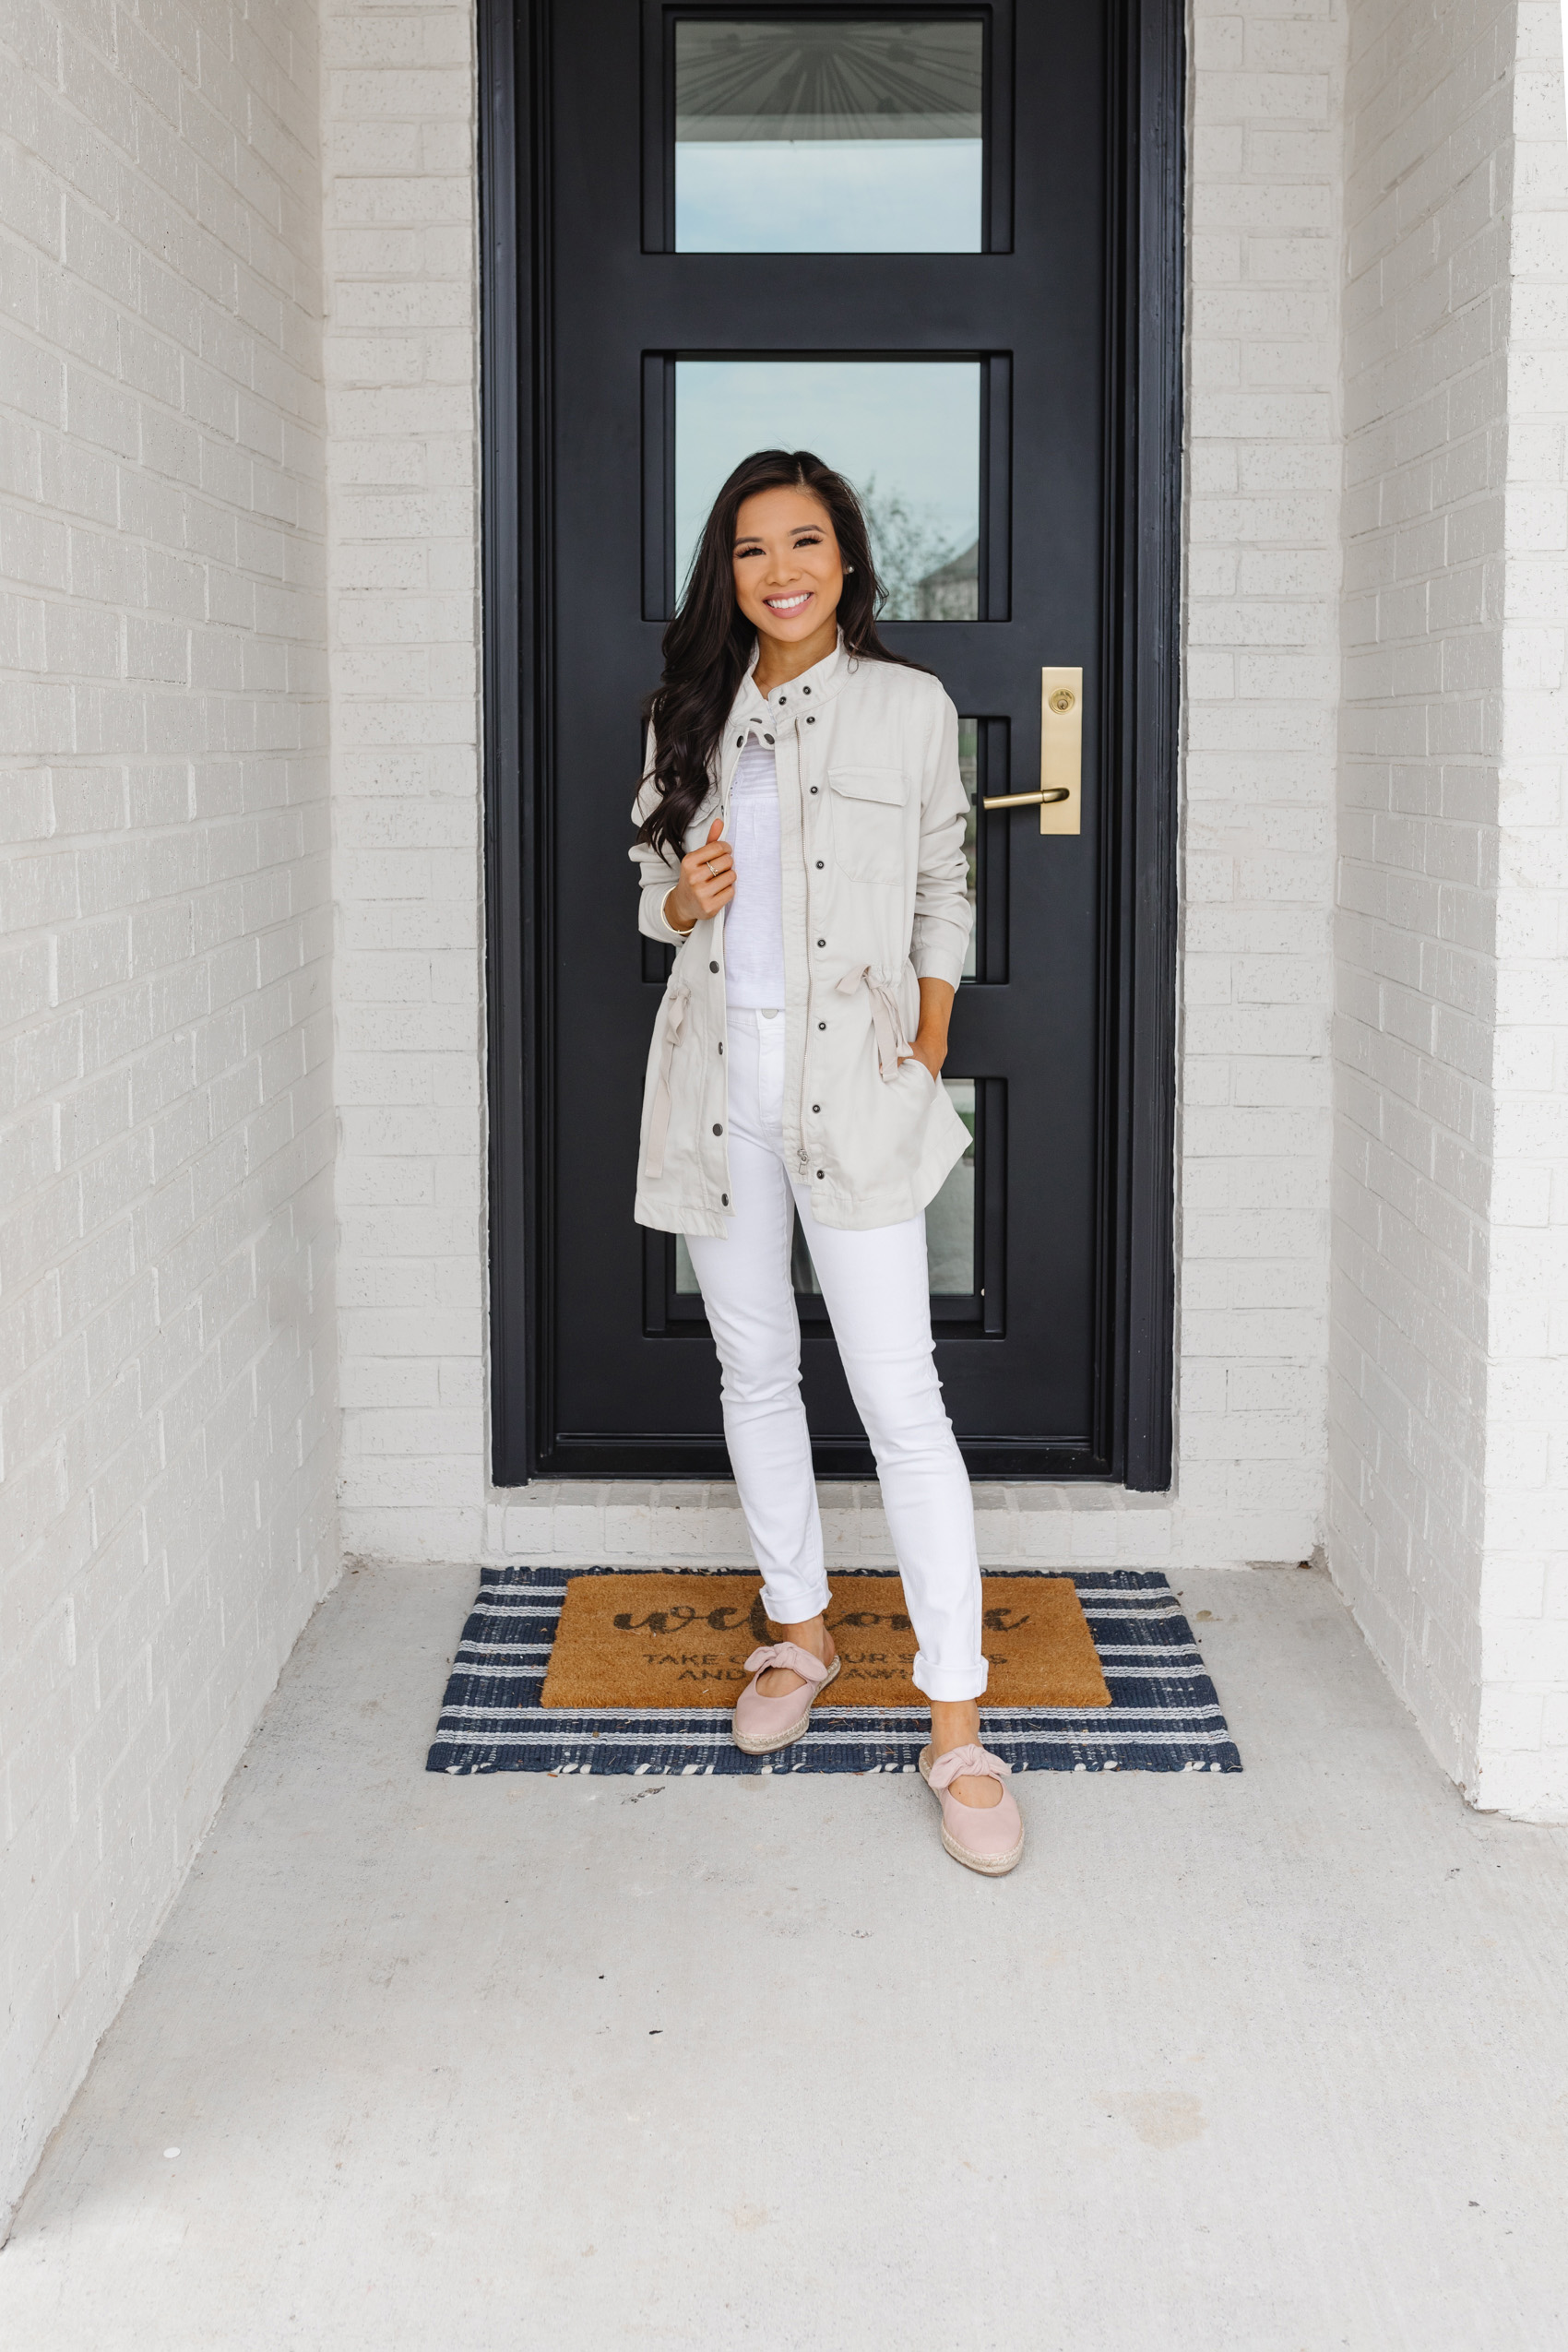 Petite blogger Hoang-Kim wears a cream colored utility jacket with white jeans and pale pink espadrilles